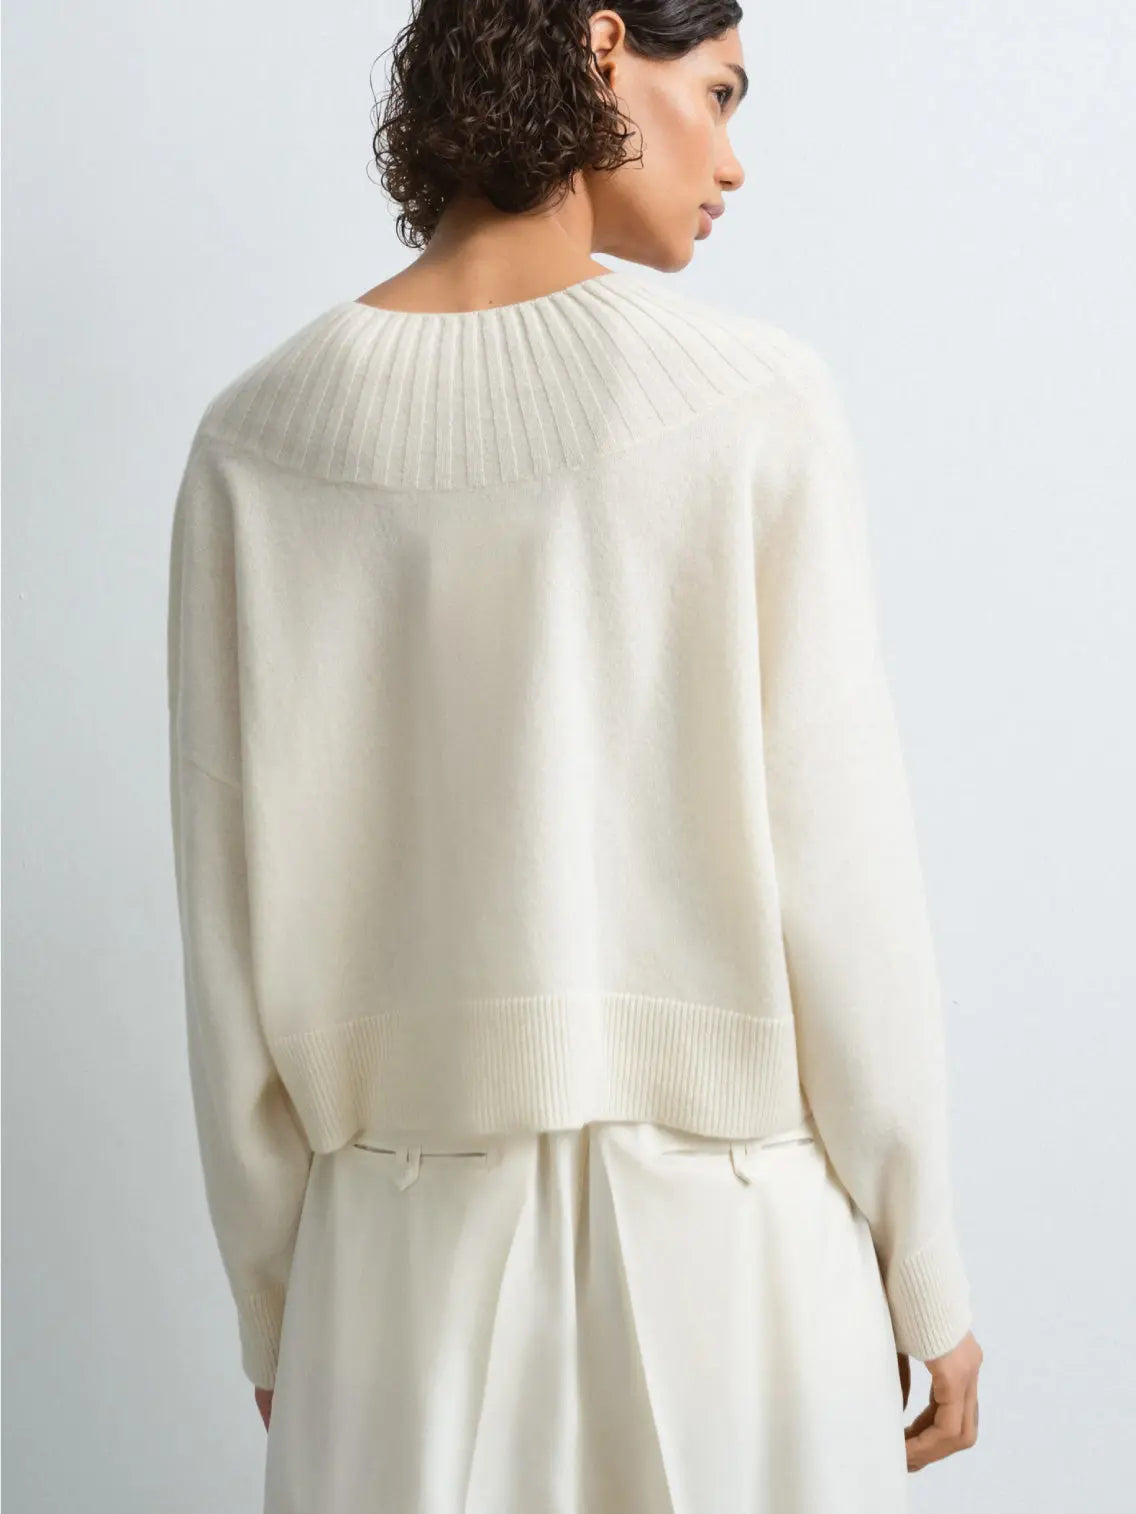 A cream-colored knit sweater with a V-neck collar and long sleeves. The Cashmere Ribbed Neck Sweater Natural by Cordera, available at Bassalstore, has a ribbed design on the neckline, cuffs, and hem, creating a cozy and slightly oversized look. It is laid out flat on a white background. Perfect for a stylish day in Barcelona.